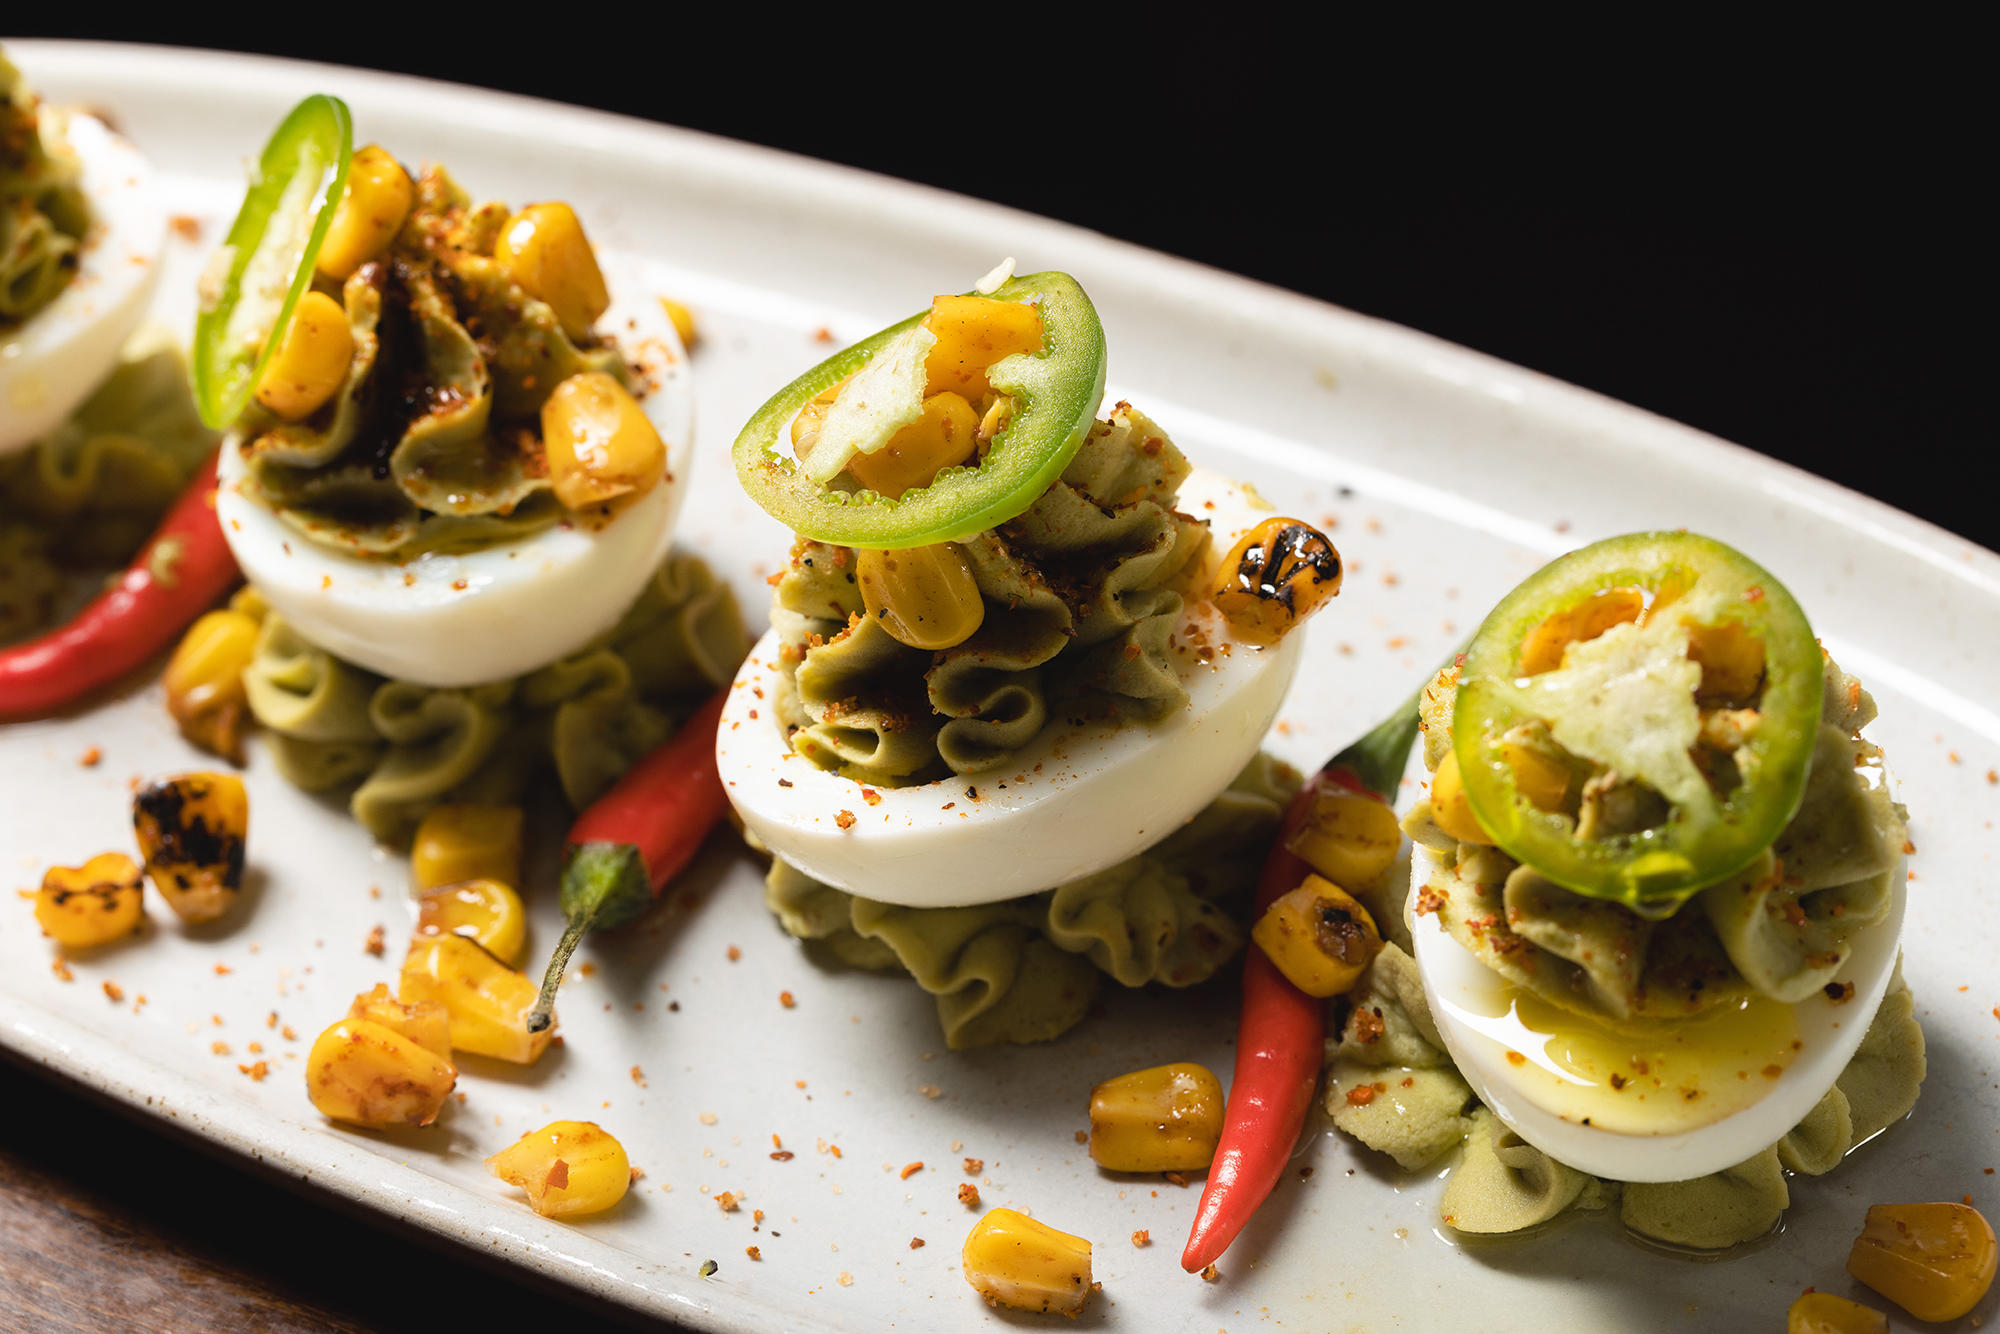 Kick off your meal at The Independent with our fun and festive Fiesta Deviled Eggs by the Theatre District